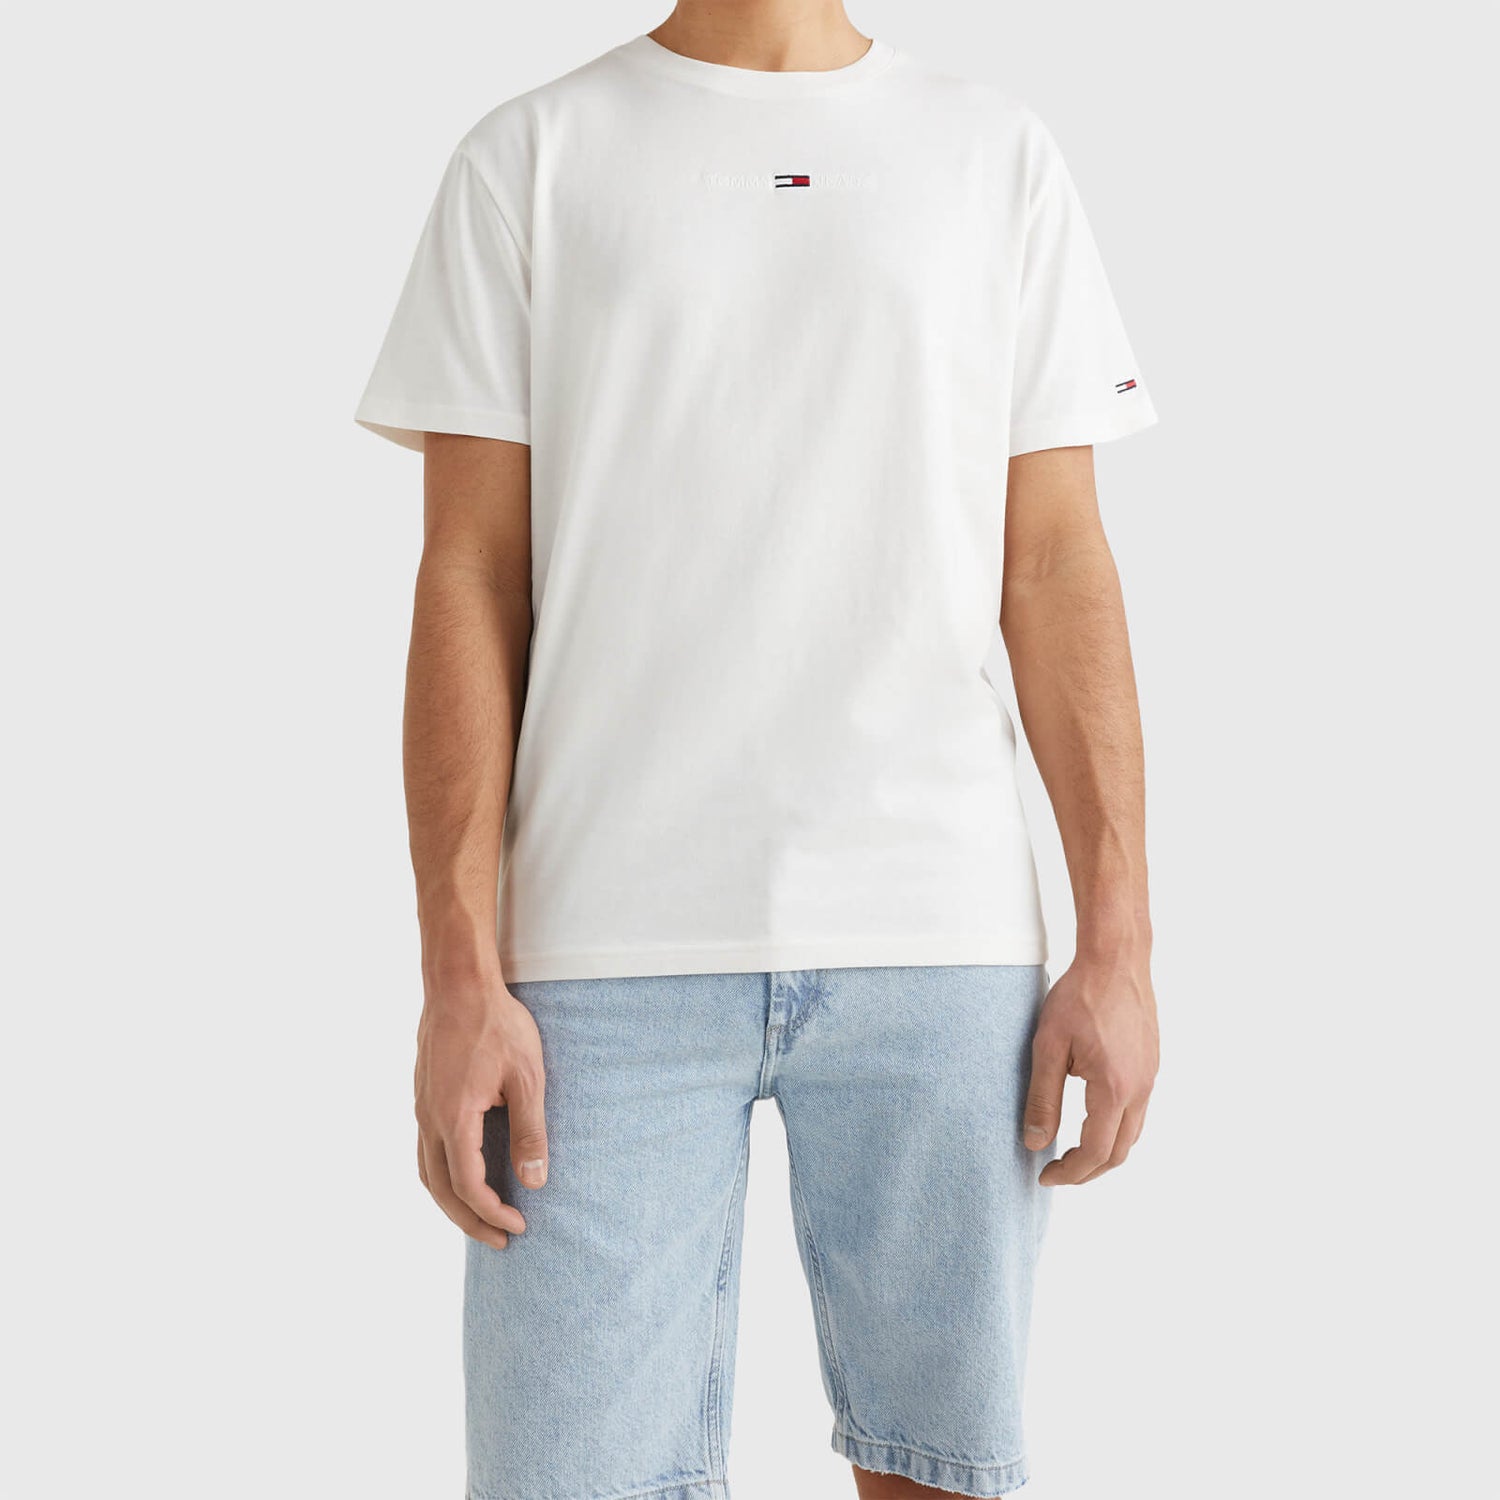 Tommy Jeans Men's Small Text T-Shirt - White - M